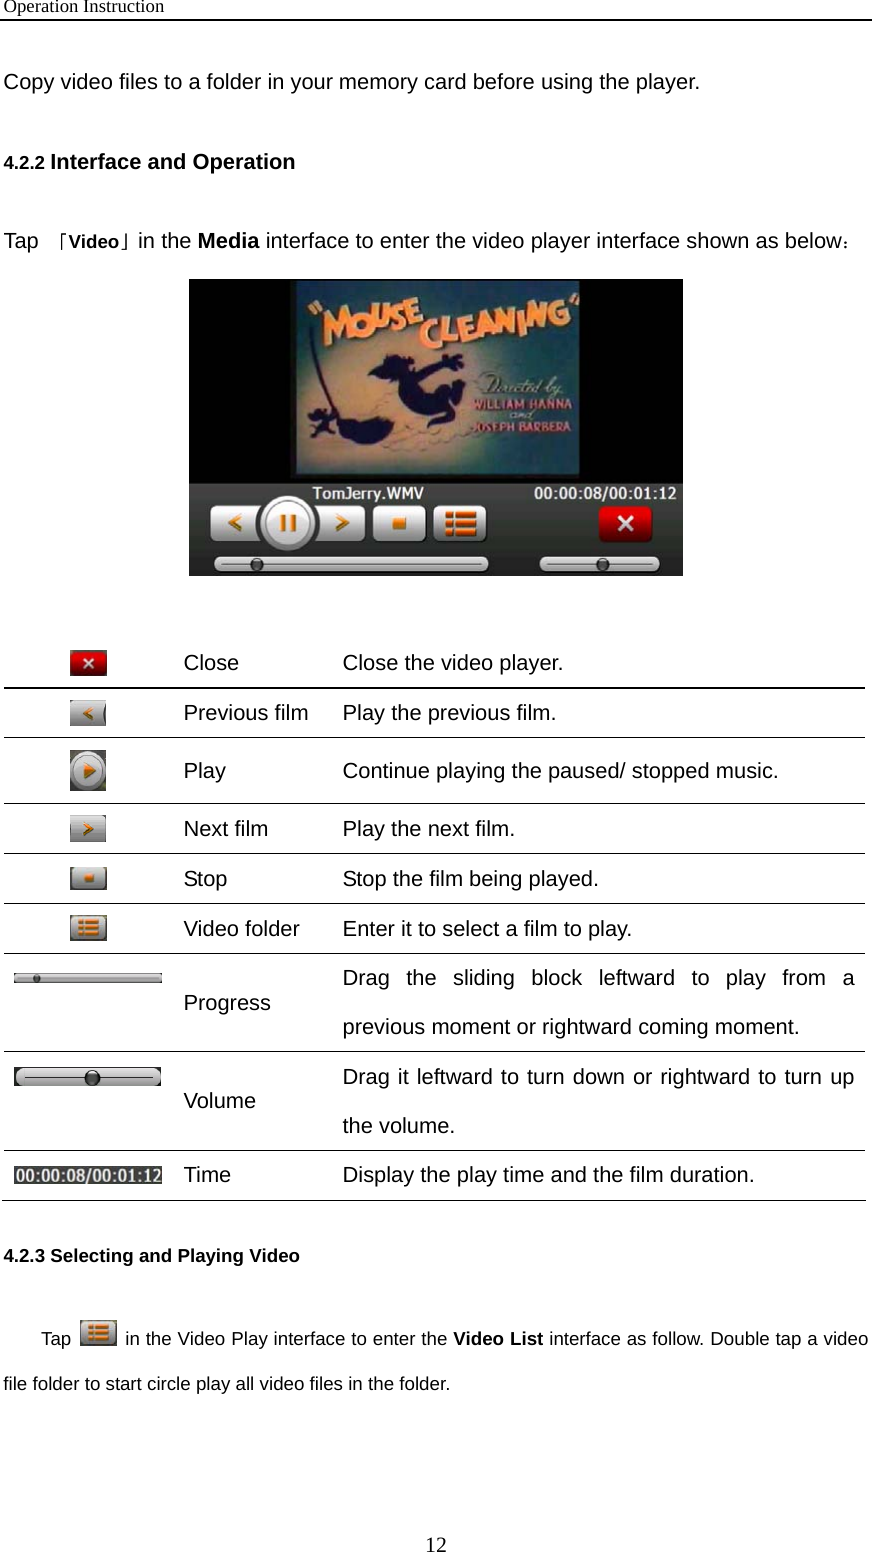 Operation Instruction 12 Copy video files to a folder in your memory card before using the player. 4.2.2 Interface and Operation Tap  「Video」in the Media interface to enter the video player interface shown as below：    Close  Close the video player.  Previous film  Play the previous film.  Play  Continue playing the paused/ stopped music.  Next film  Play the next film.  Stop  Stop the film being played.  Video folder  Enter it to select a film to play.  Progress  Drag the sliding block leftward to play from a previous moment or rightward coming moment.  Volume  Drag it leftward to turn down or rightward to turn up the volume.  Time  Display the play time and the film duration. 4.2.3 Selecting and Playing Video   Tap    in the Video Play interface to enter the Video List interface as follow. Double tap a video file folder to start circle play all video files in the folder.   